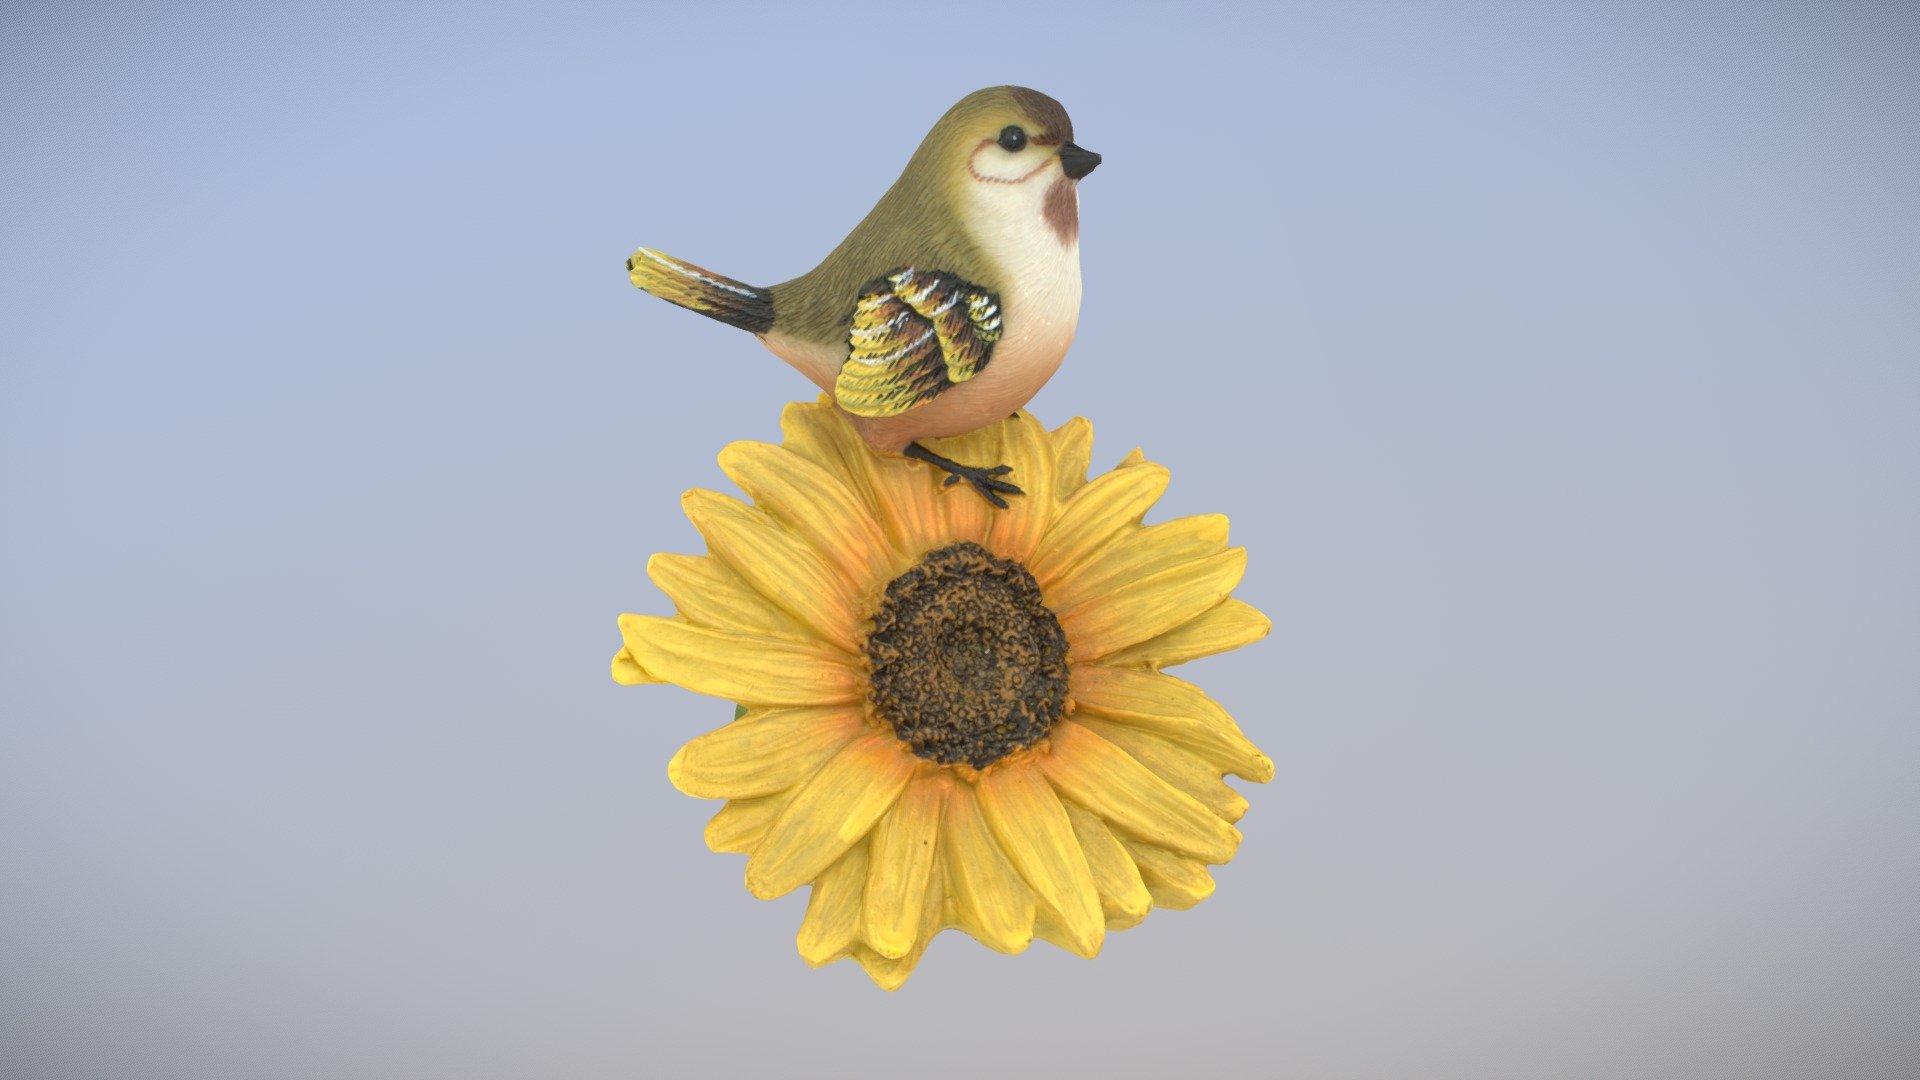 Representing team Canada, this is my third submission for round one of the 3DFlow world cup. 50 cameras were all successfully utilized in this recreation.

Another home decoration, this features a small bird atop a sunflower. With many shapes and details, I was suprised on how well this reconstructed with just 50 cameras 3d model